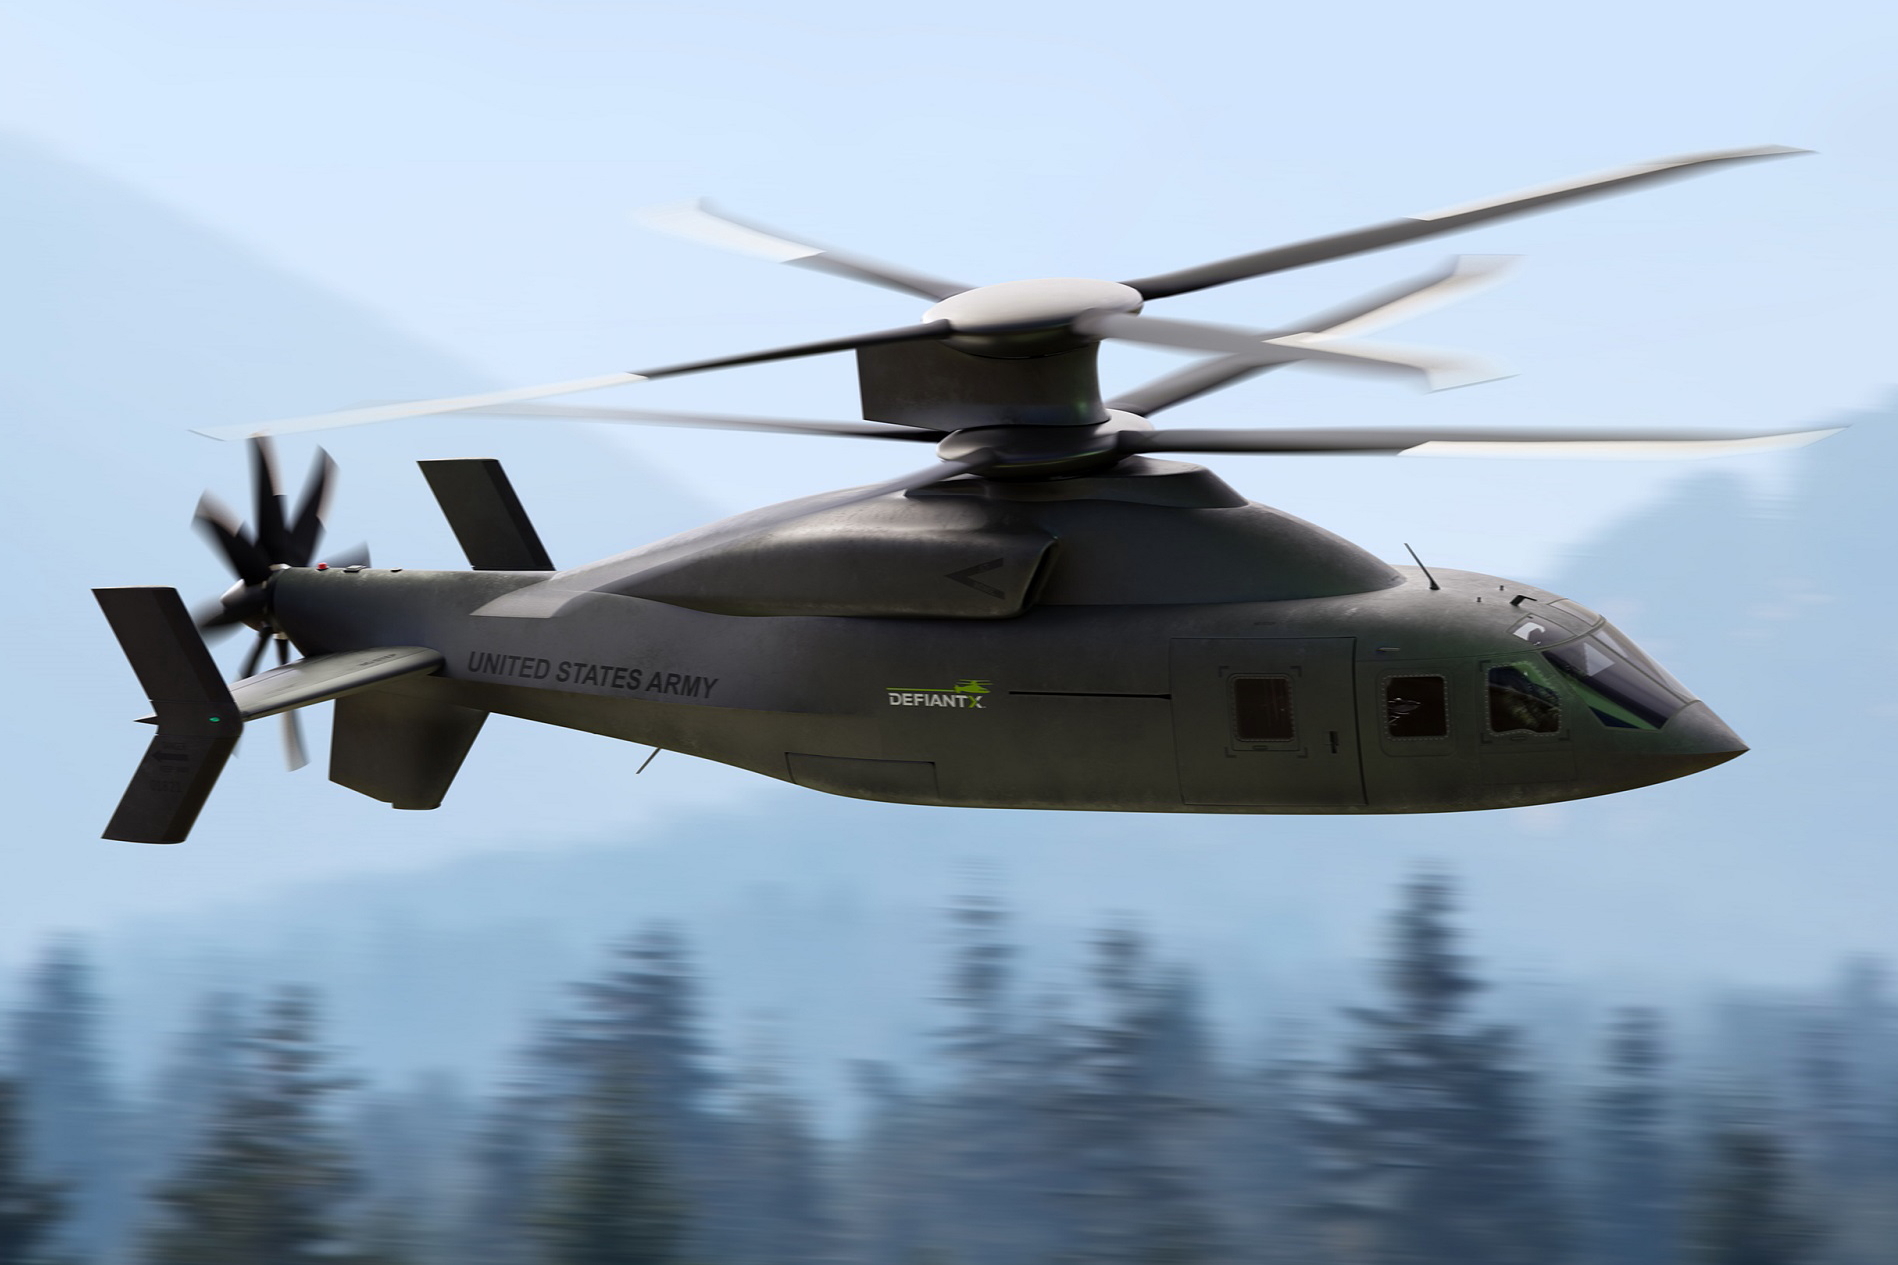 Sikorsky and Boeing have unveiled details of what they promise will be the fastest, most maneuverable and most survivable assault helicopter in history. Named DEFIANT X, the helicopter has been designed for the U.S. Army’s Future Long Range Assault Aircraft competition (FLRAA). DEFIANT X flies twice as far and fast as the venerable Black Hawk helicopter it is designed to replace. Click to enlarge.